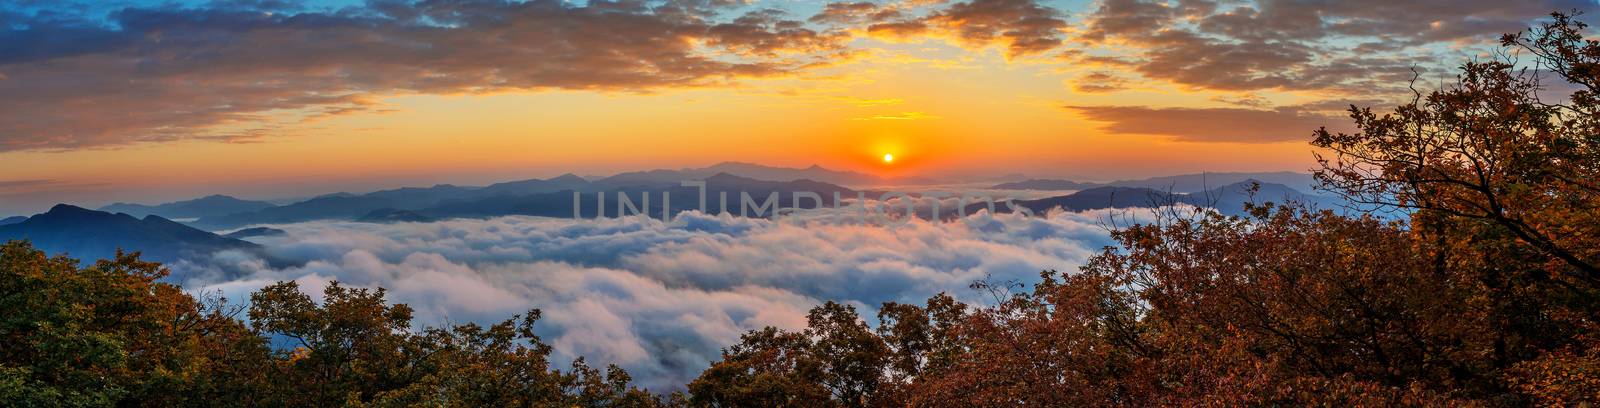 Seoraksan mountains is covered by morning fog and sunrise in Seo by gutarphotoghaphy